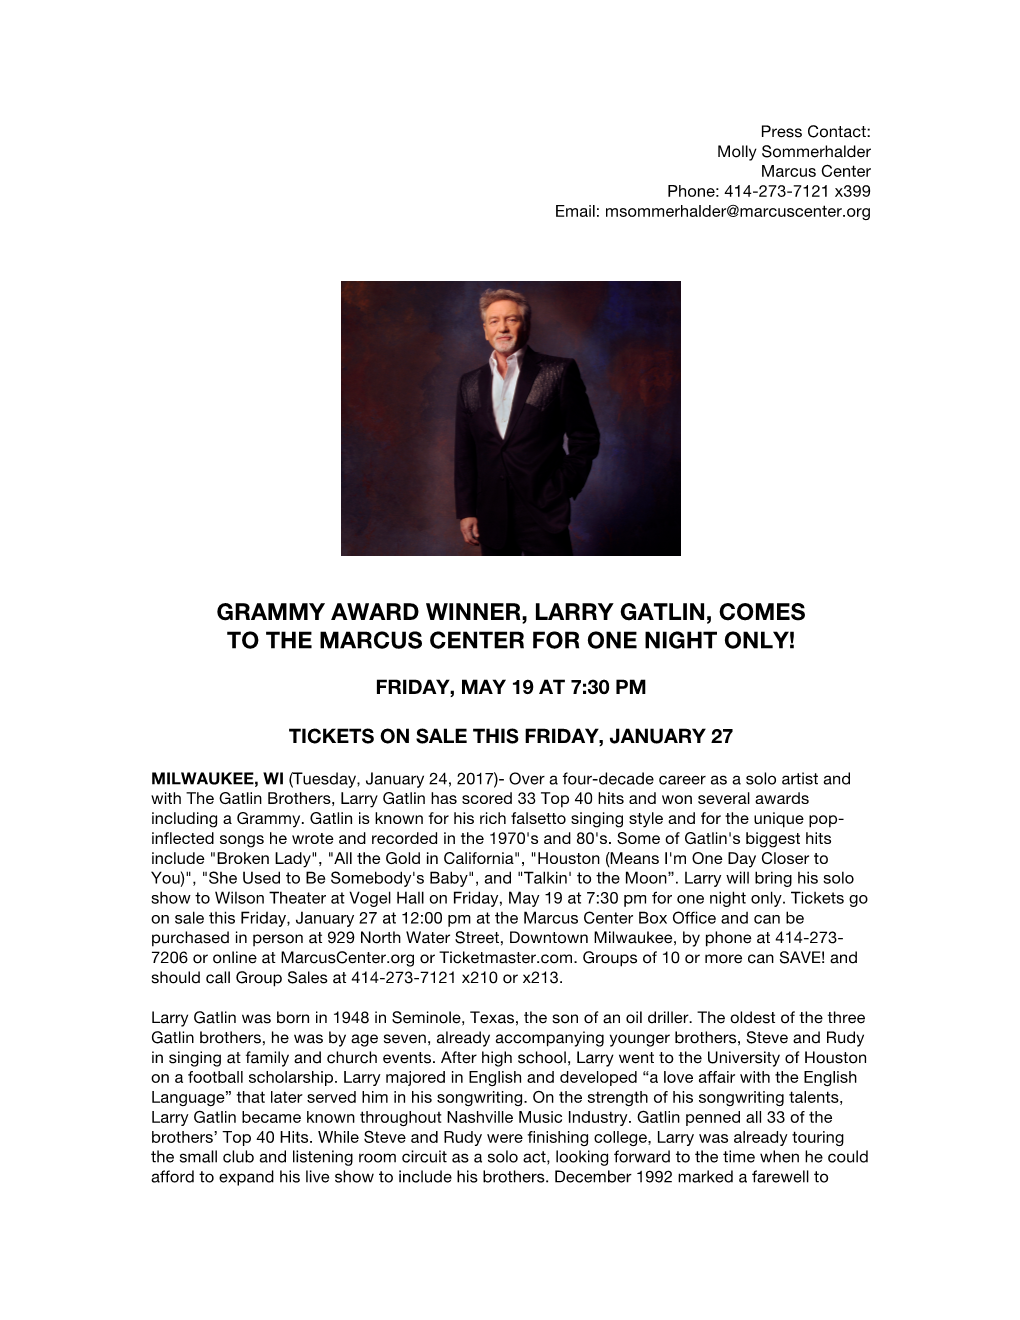 Grammy Award Winner, Larry Gatlin, Comes to the Marcus Center for One Night Only!